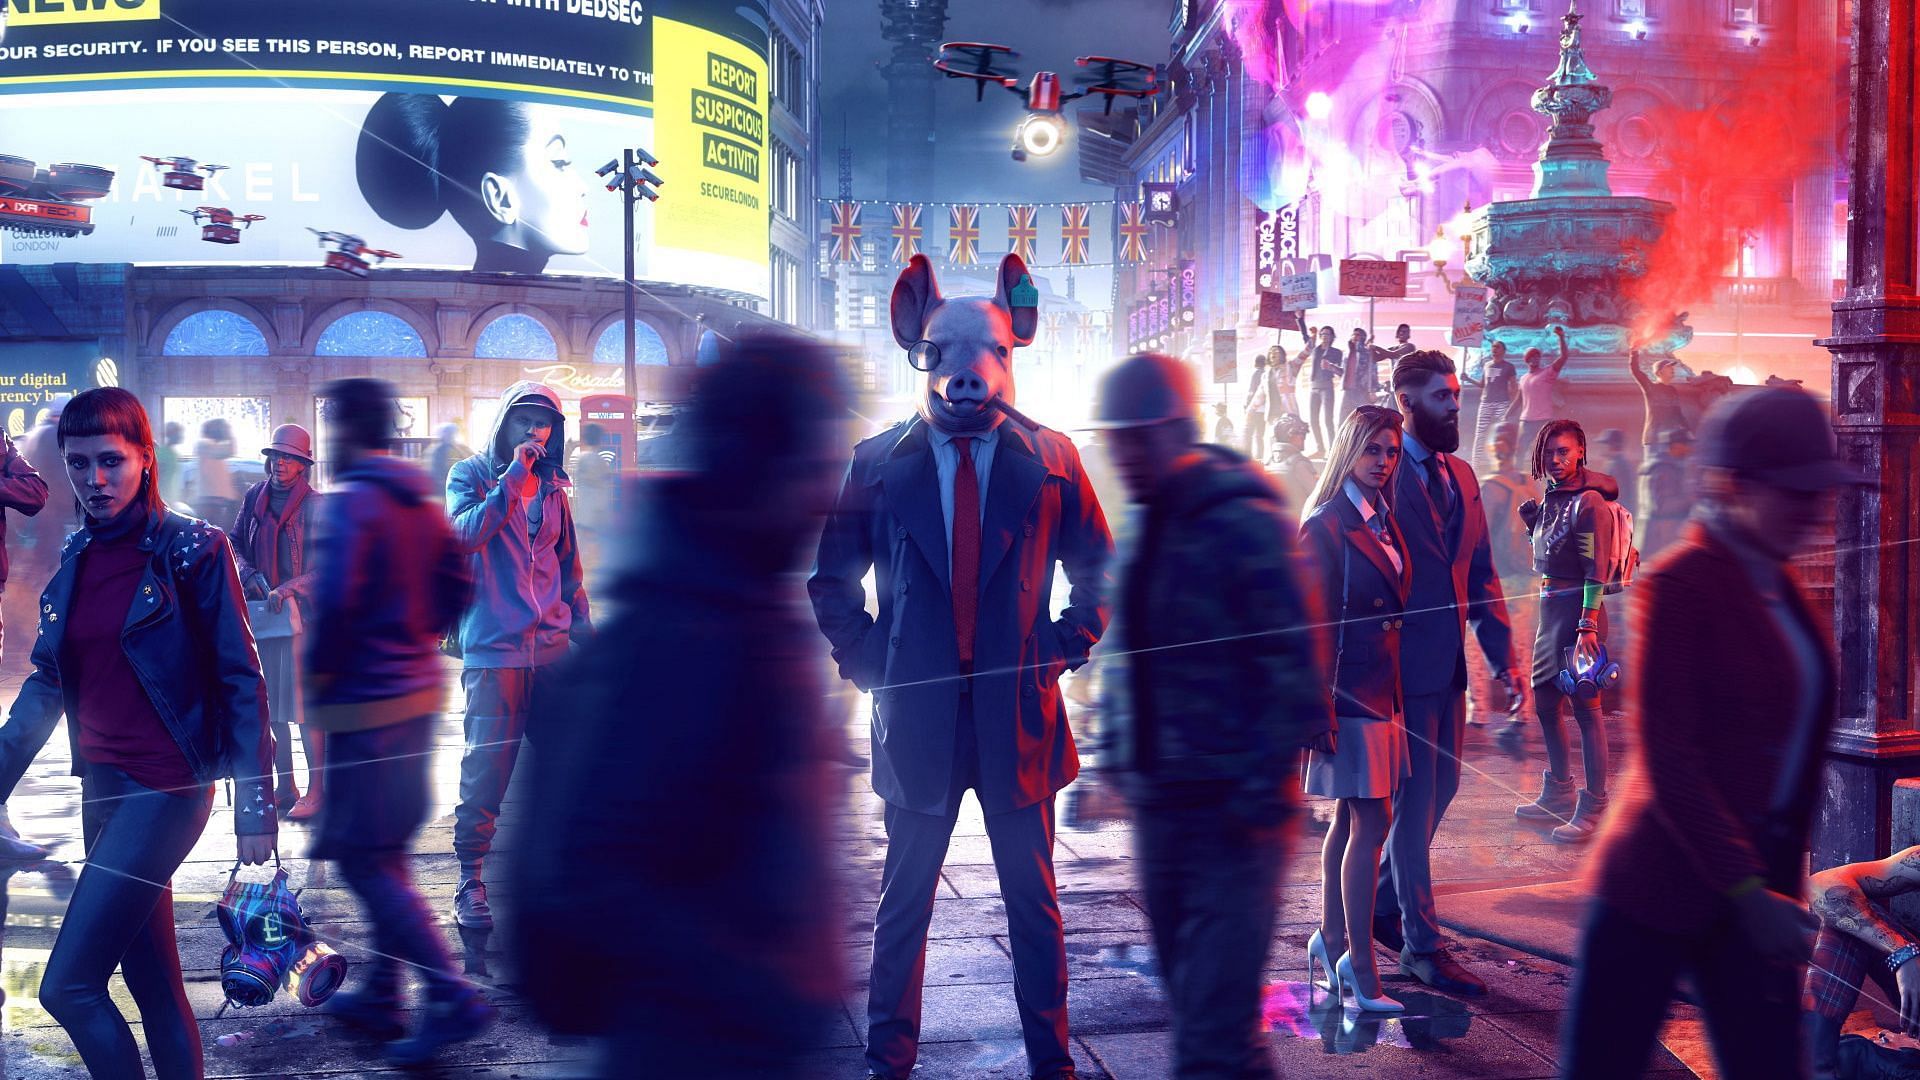 Watch Dogs Legion has so far been unavailable on Steam (Image via Uisoft)